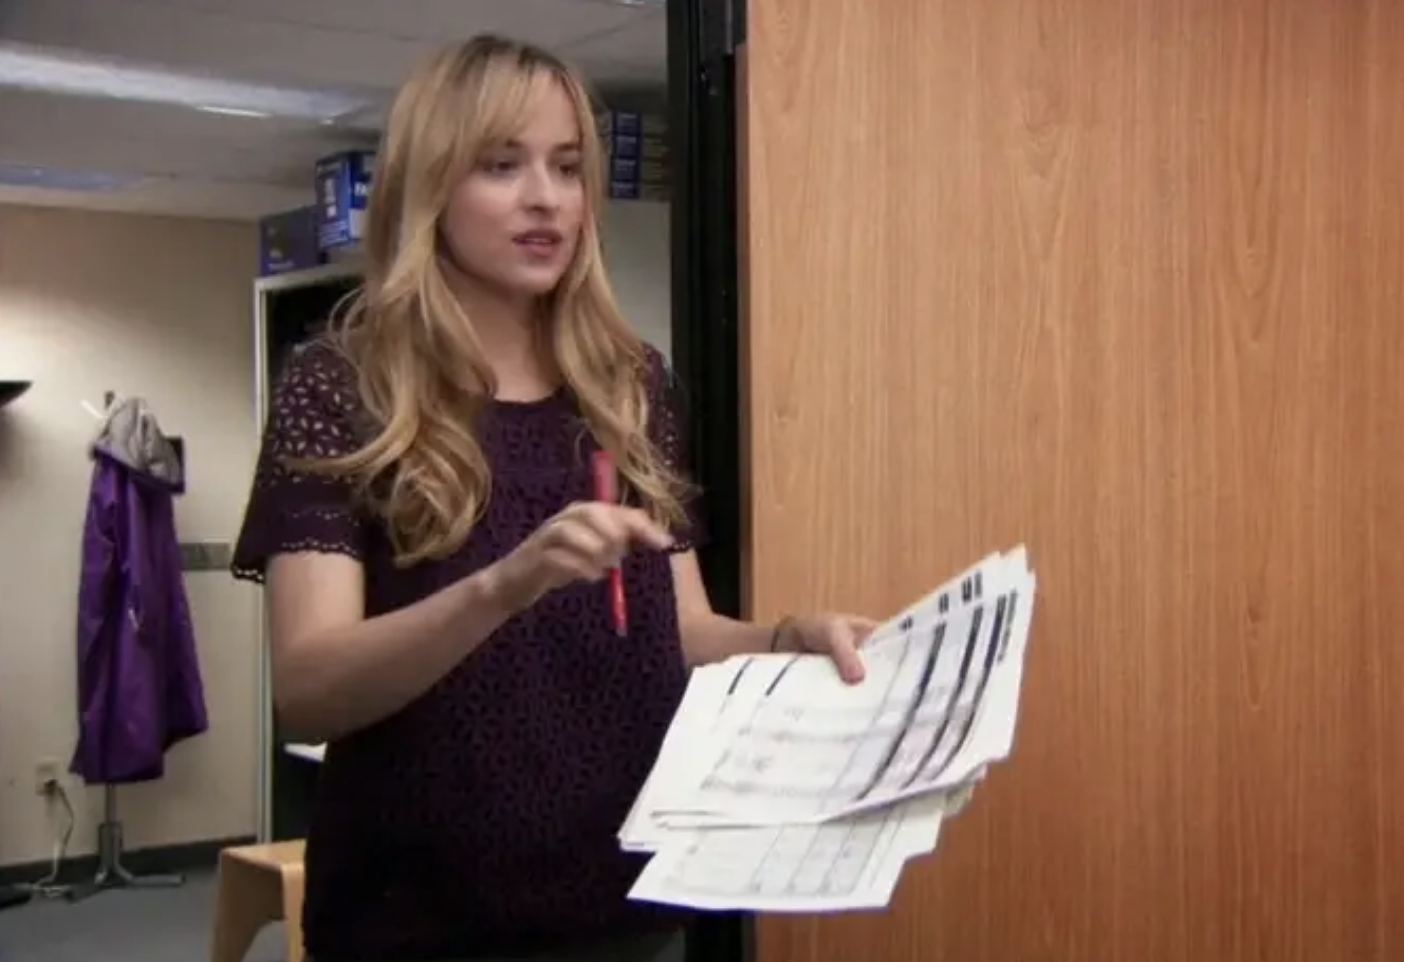 Screenshot from &quot;The Office&quot;